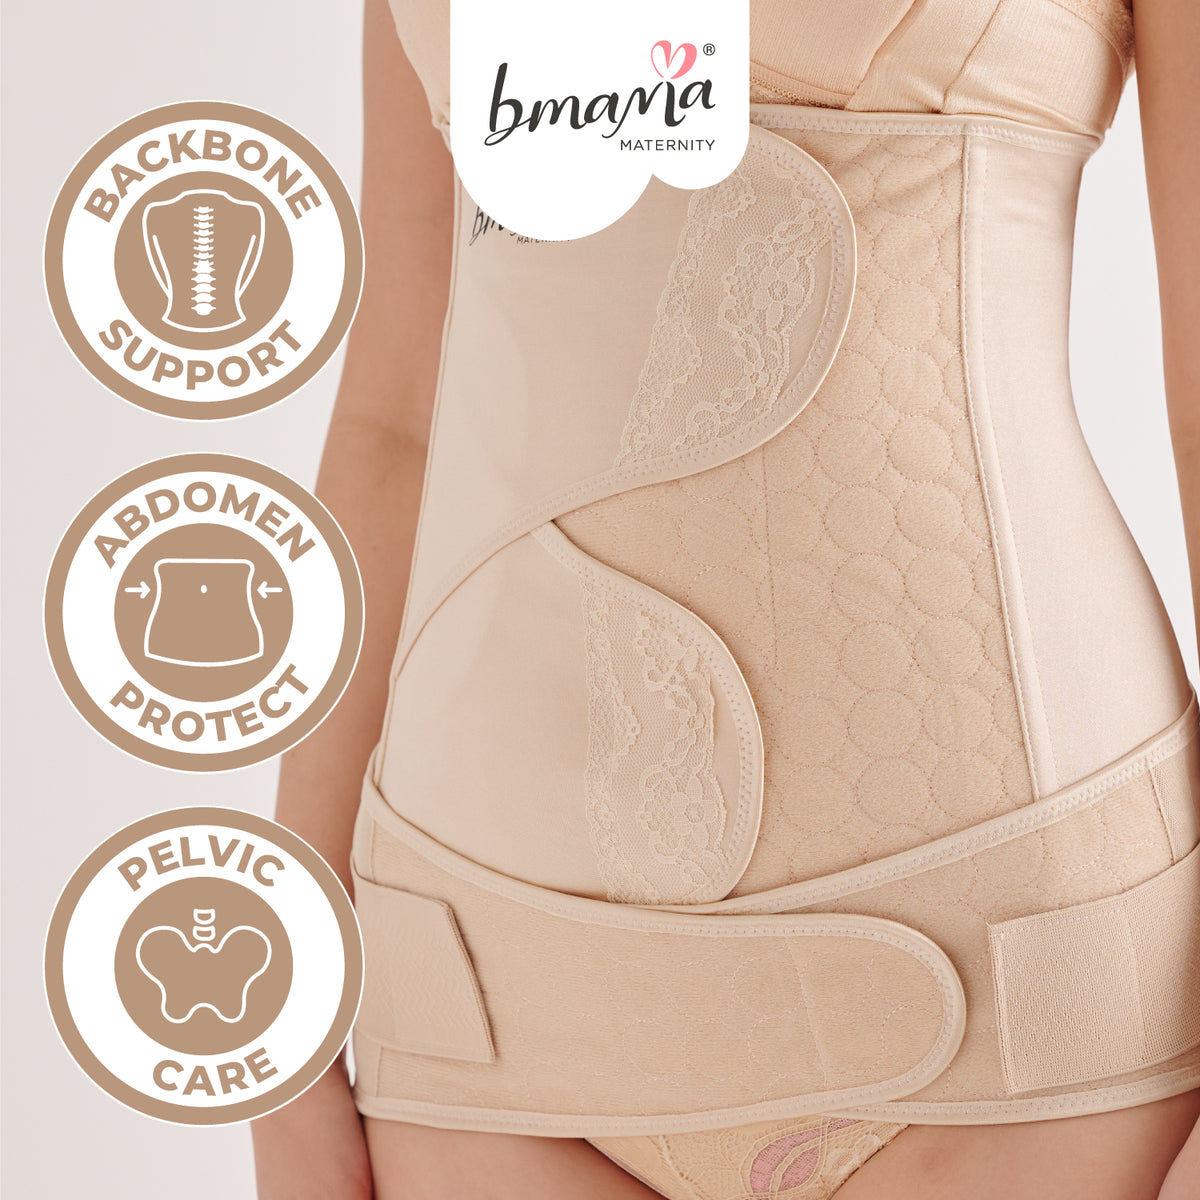 Bmama 2 in 1 Belly and Pelvic Binder Set -Golden Girdle –